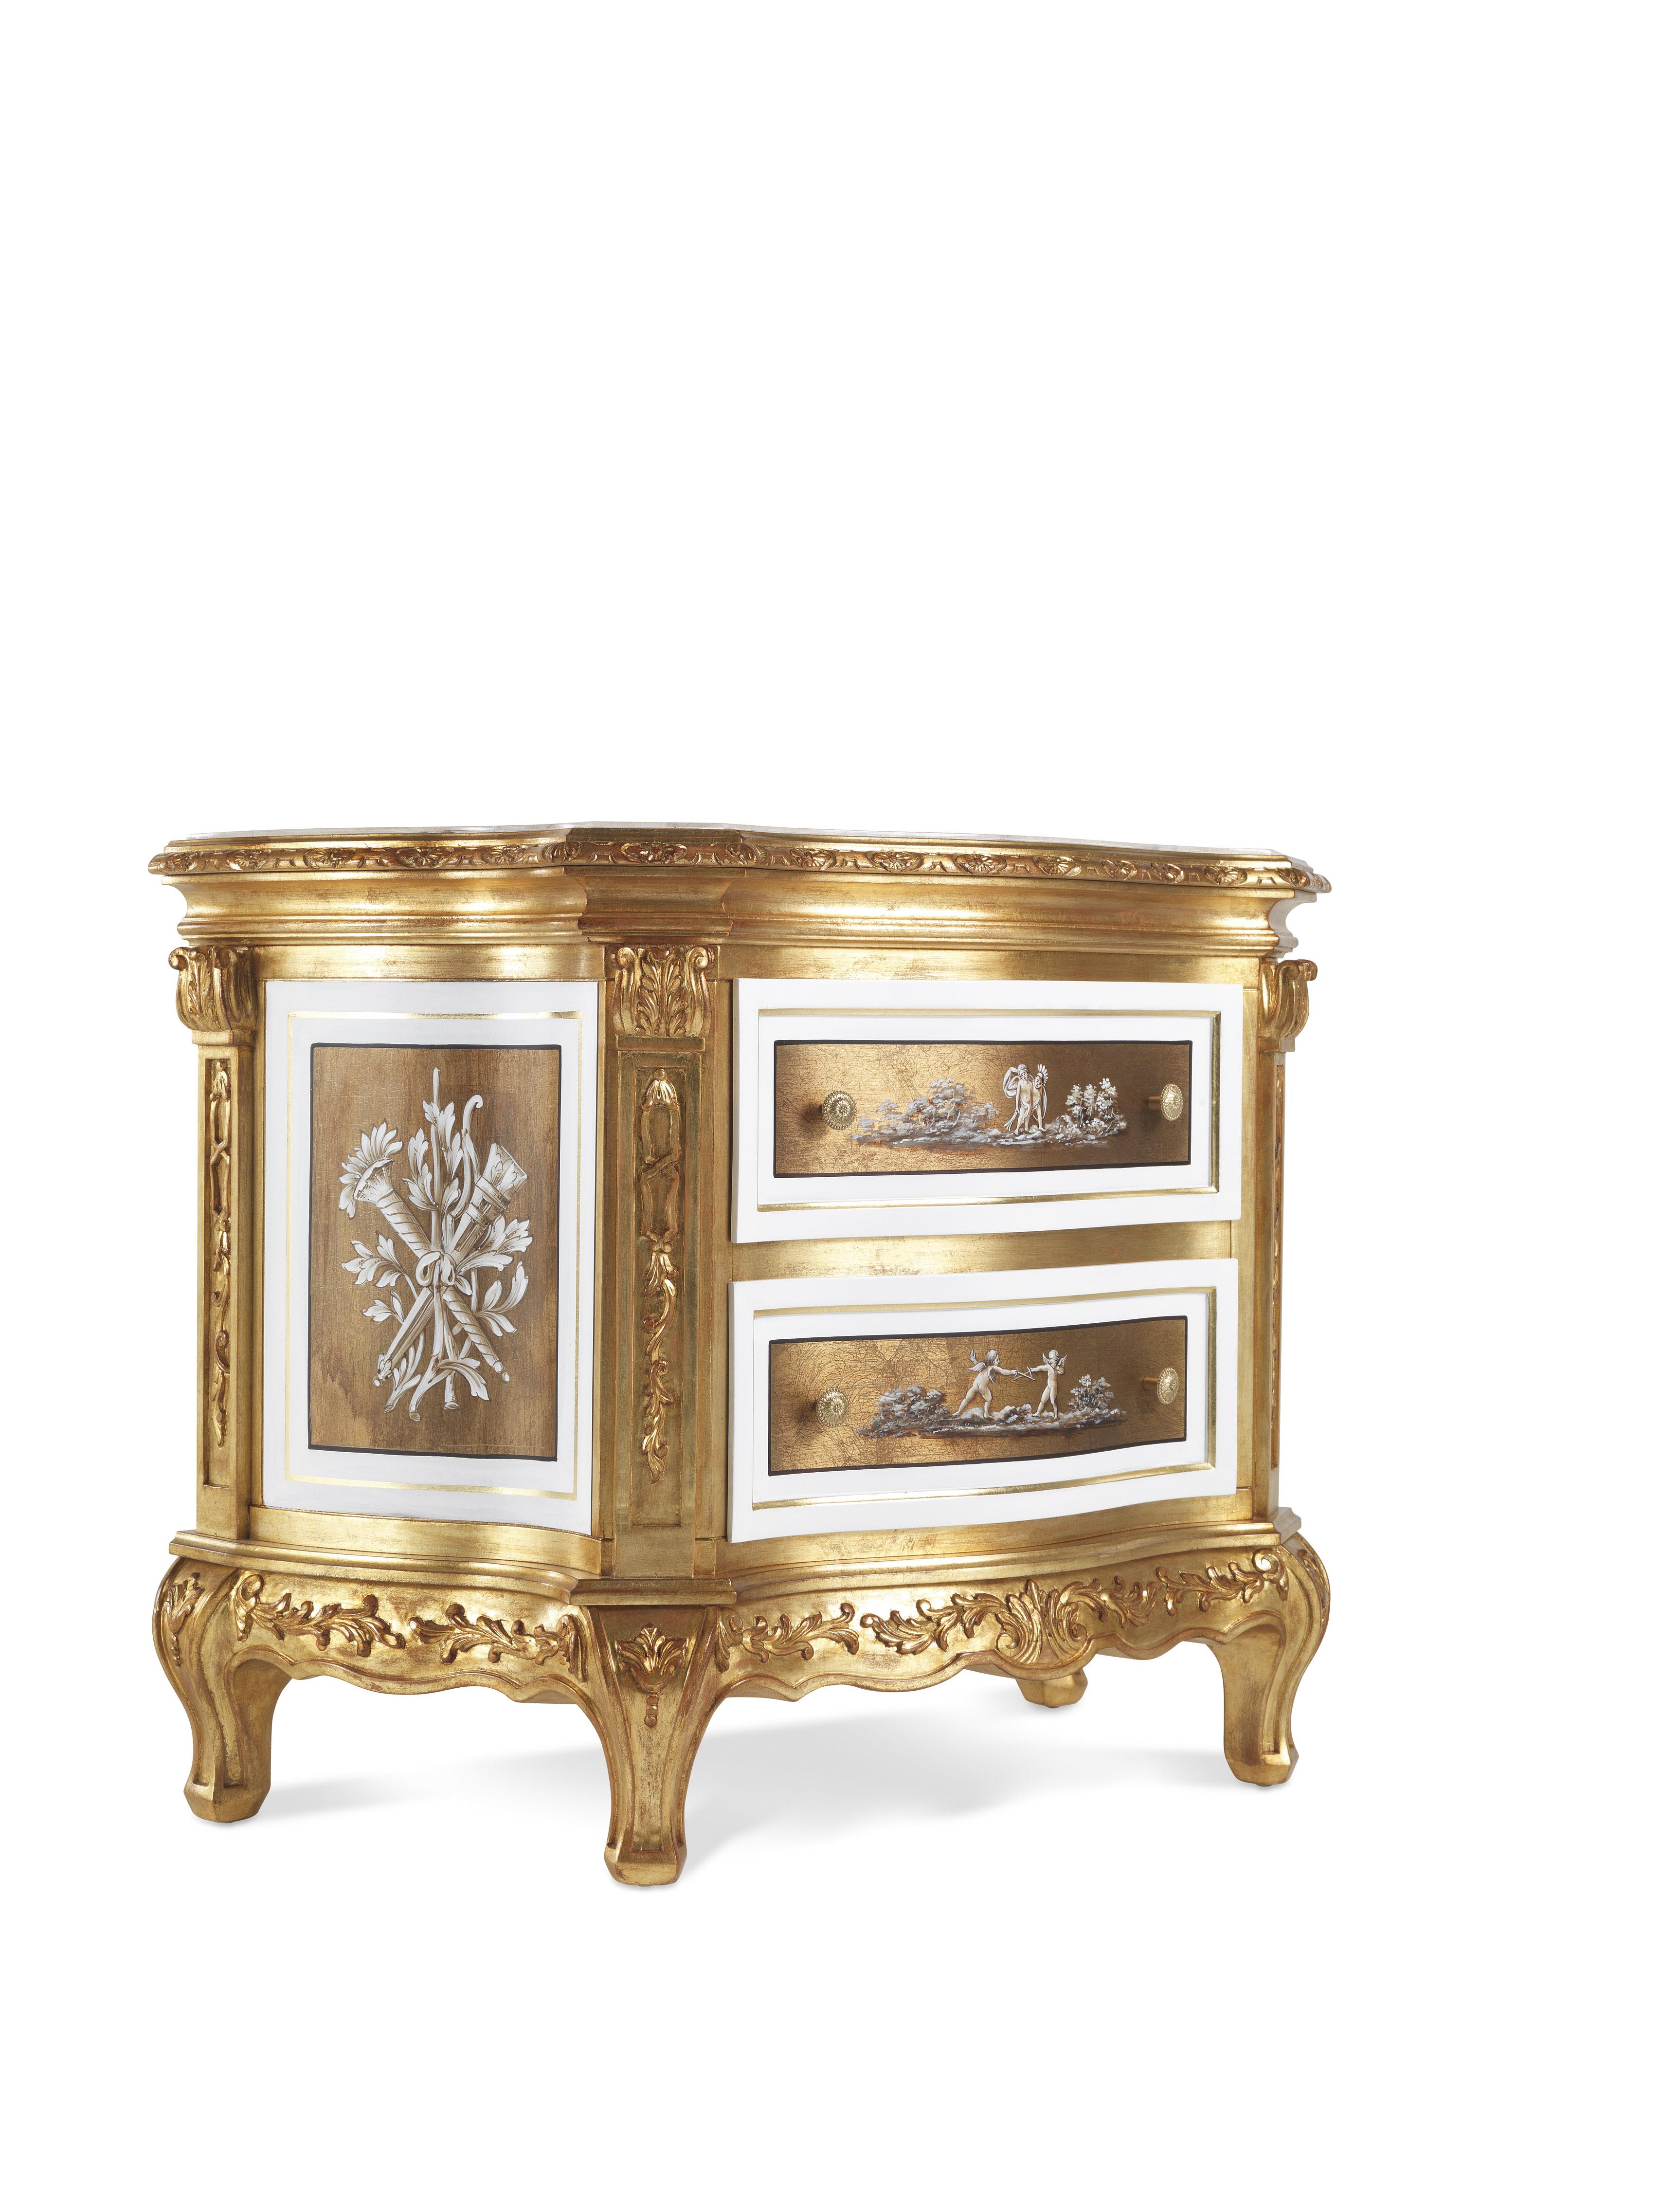 A line of furnishings in Baroque style, the perfect expression of Jumbo Collection’ decorative spirit and craftsmanship heritage.
The night tables of the line are characterized by a beechwood structure, with low-relief carvings finished in antique